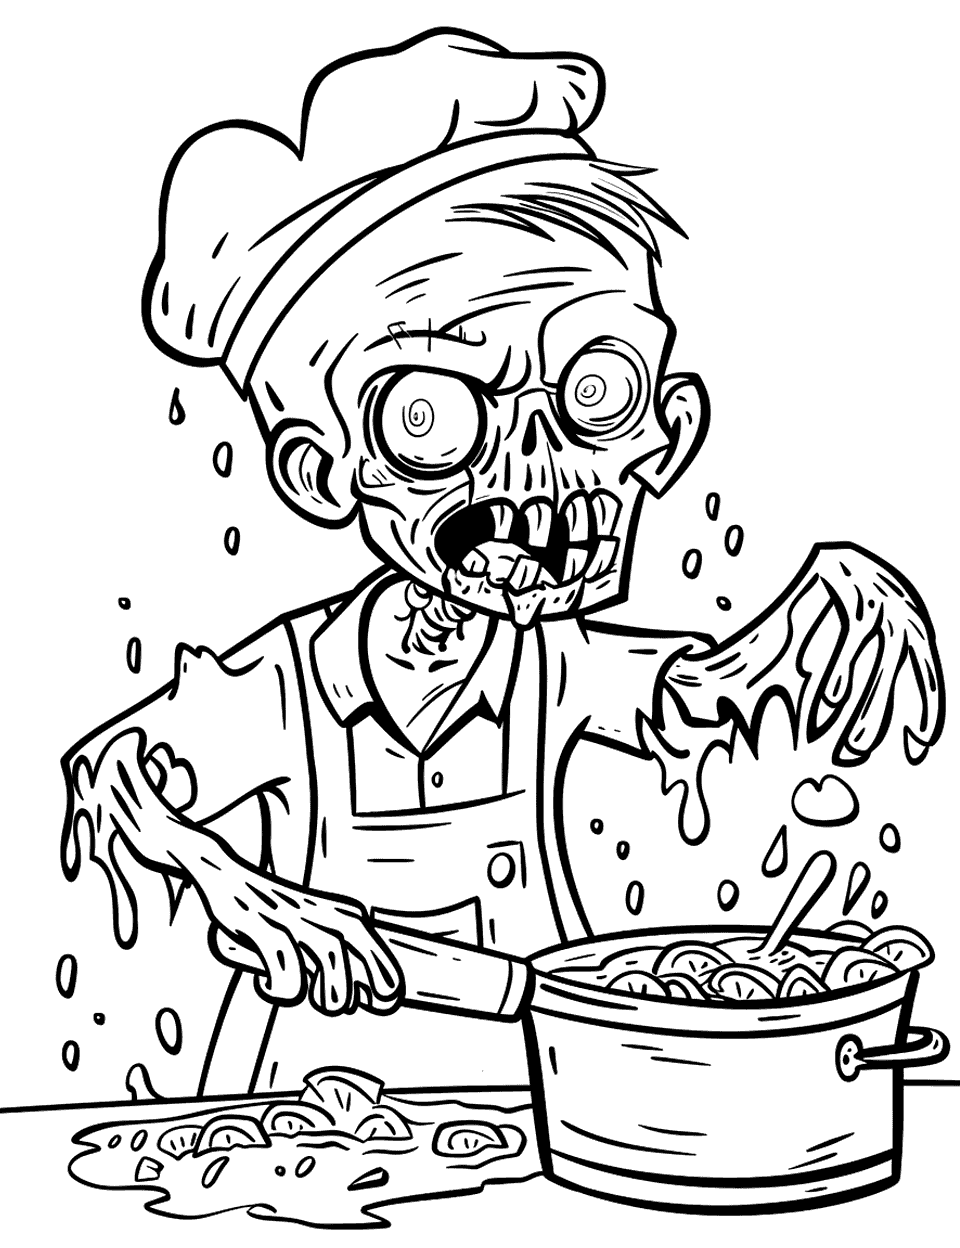 Zombie Chef Cooking Coloring Page - A zombie chef preparing a meal in a kitchen.